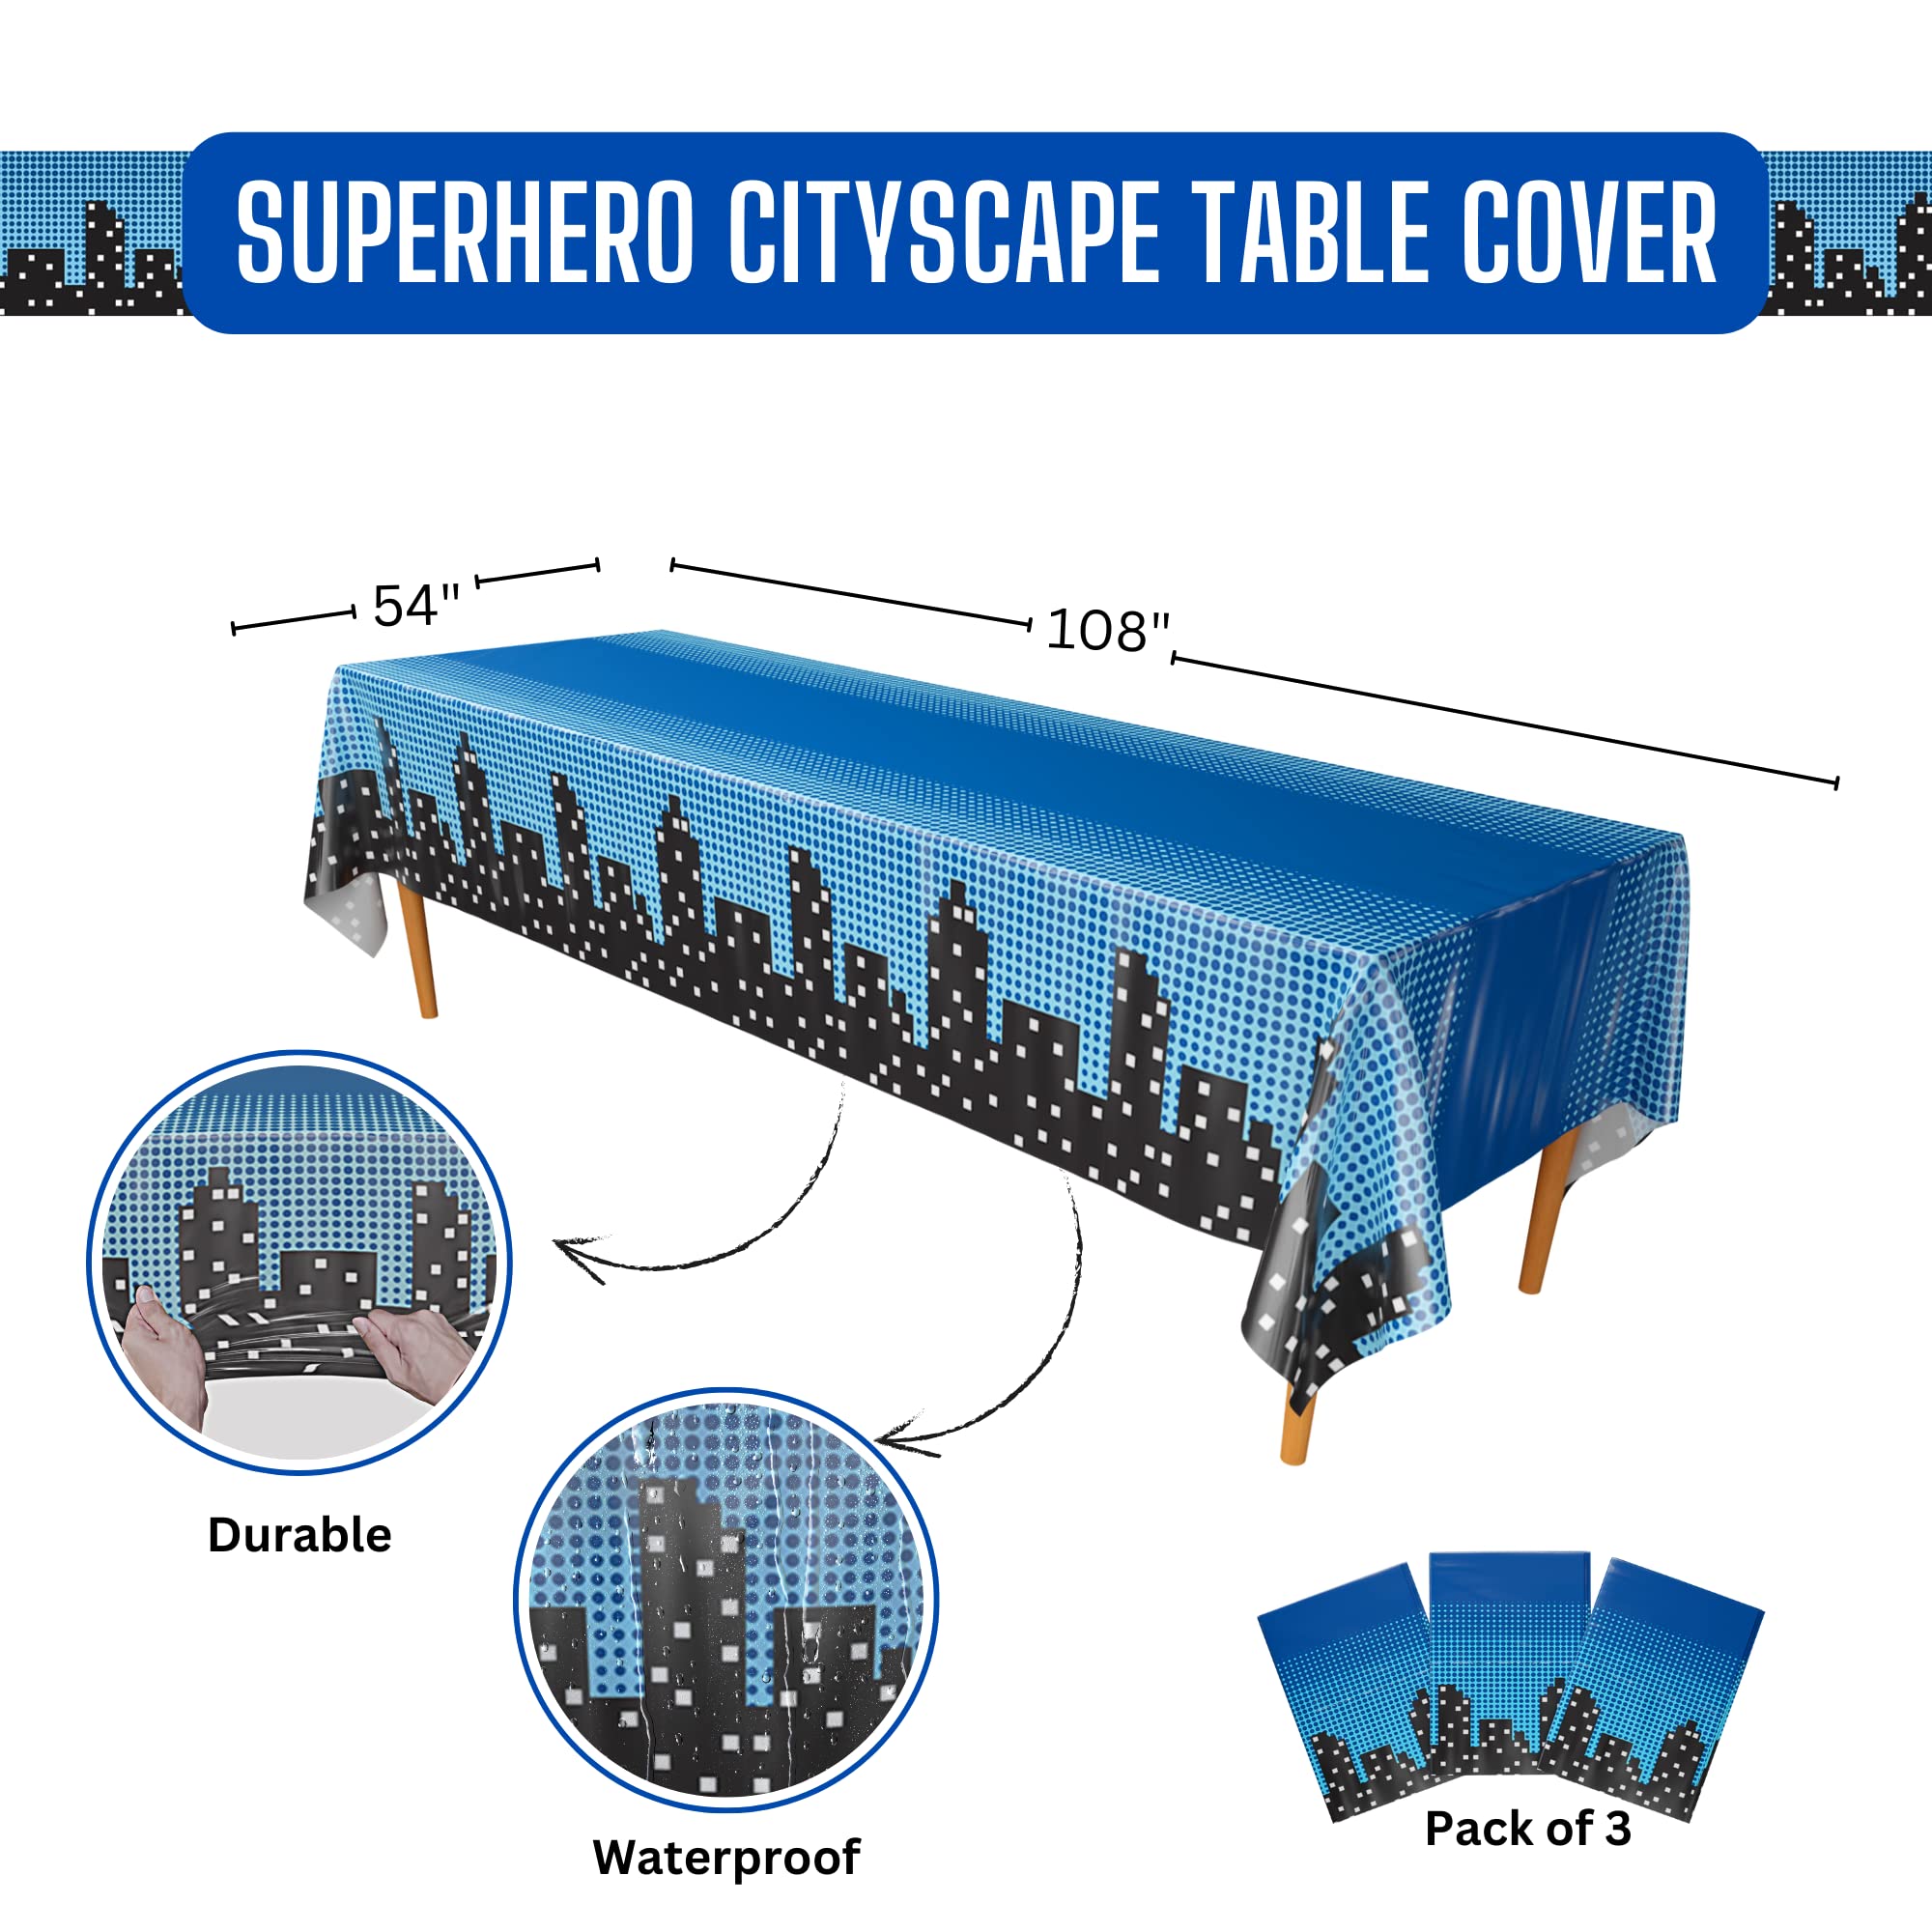 Superhero Cityscape Table Covers - 54in x 108in (3 Pack)